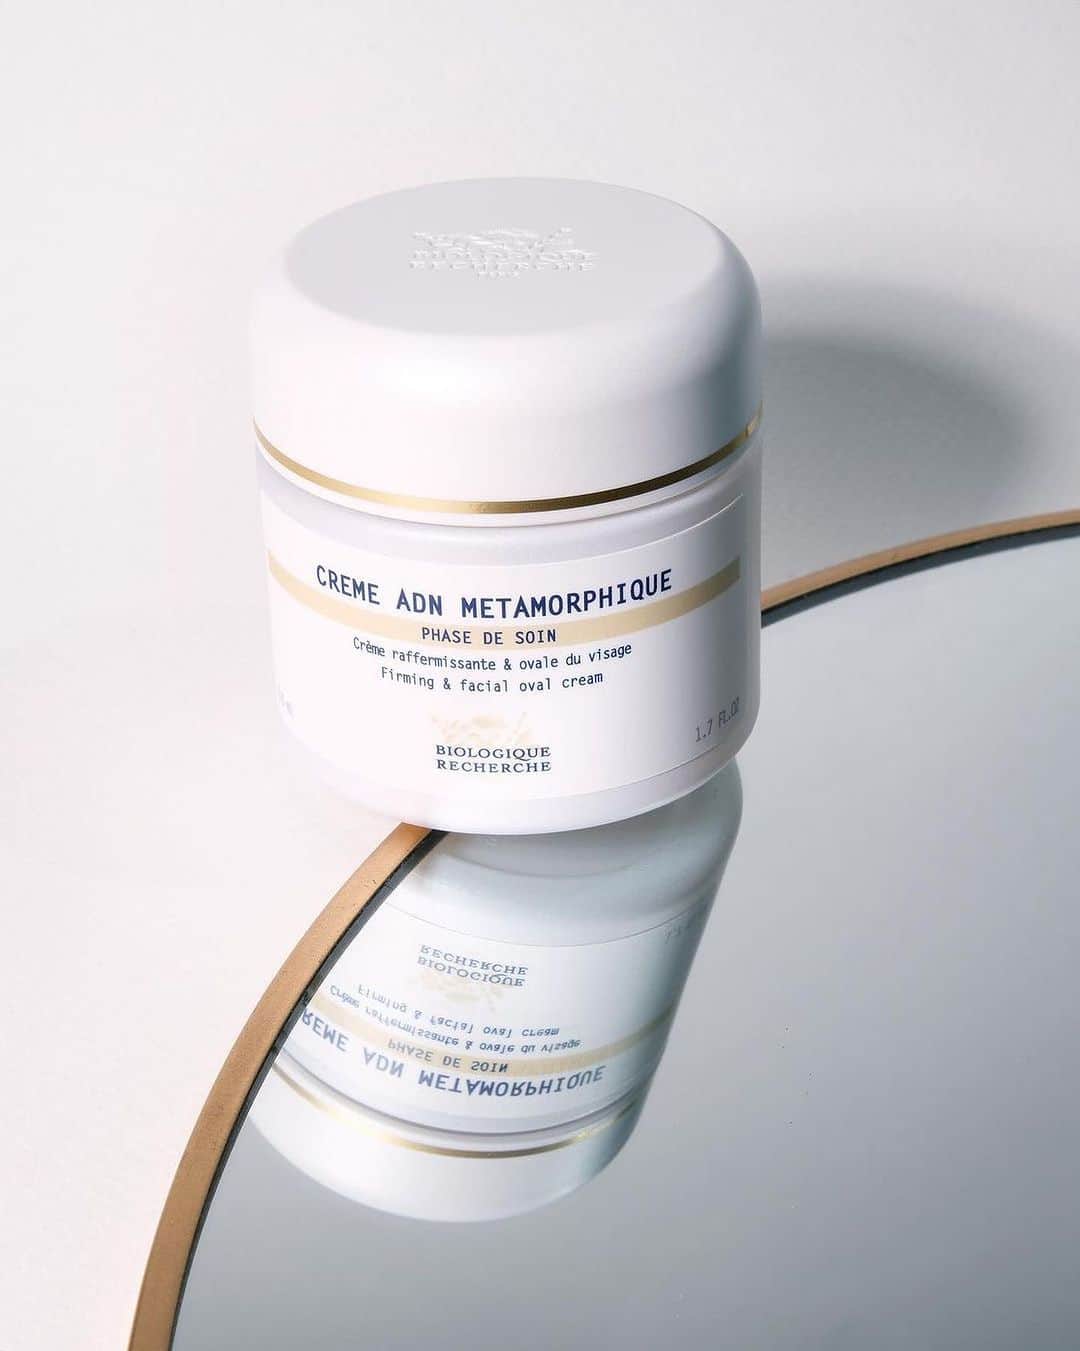 Biologique Recherche USAのインスタグラム：「Crème ADN Metamorphique✨ was created to target facial ptosis, the sagging of skin tissues caused by skin aging. It works to restructure the natural contours of the face, restoring definition, volume, and facial balance for a lifted and more youthful appearance.   The cream’s exceptional tightening action improves the biomechanical properties of the skin for greater elasticity and firmness.  Recommended for Skin Instants© lacking structure and tone.   📸: @insight.projects   #BiologiqueRecherche #FollowYourSkinInstant #BuildingBetterSkin #radiantskin #wellnesswithBR #CremeADNMetamorphique #ptosis」